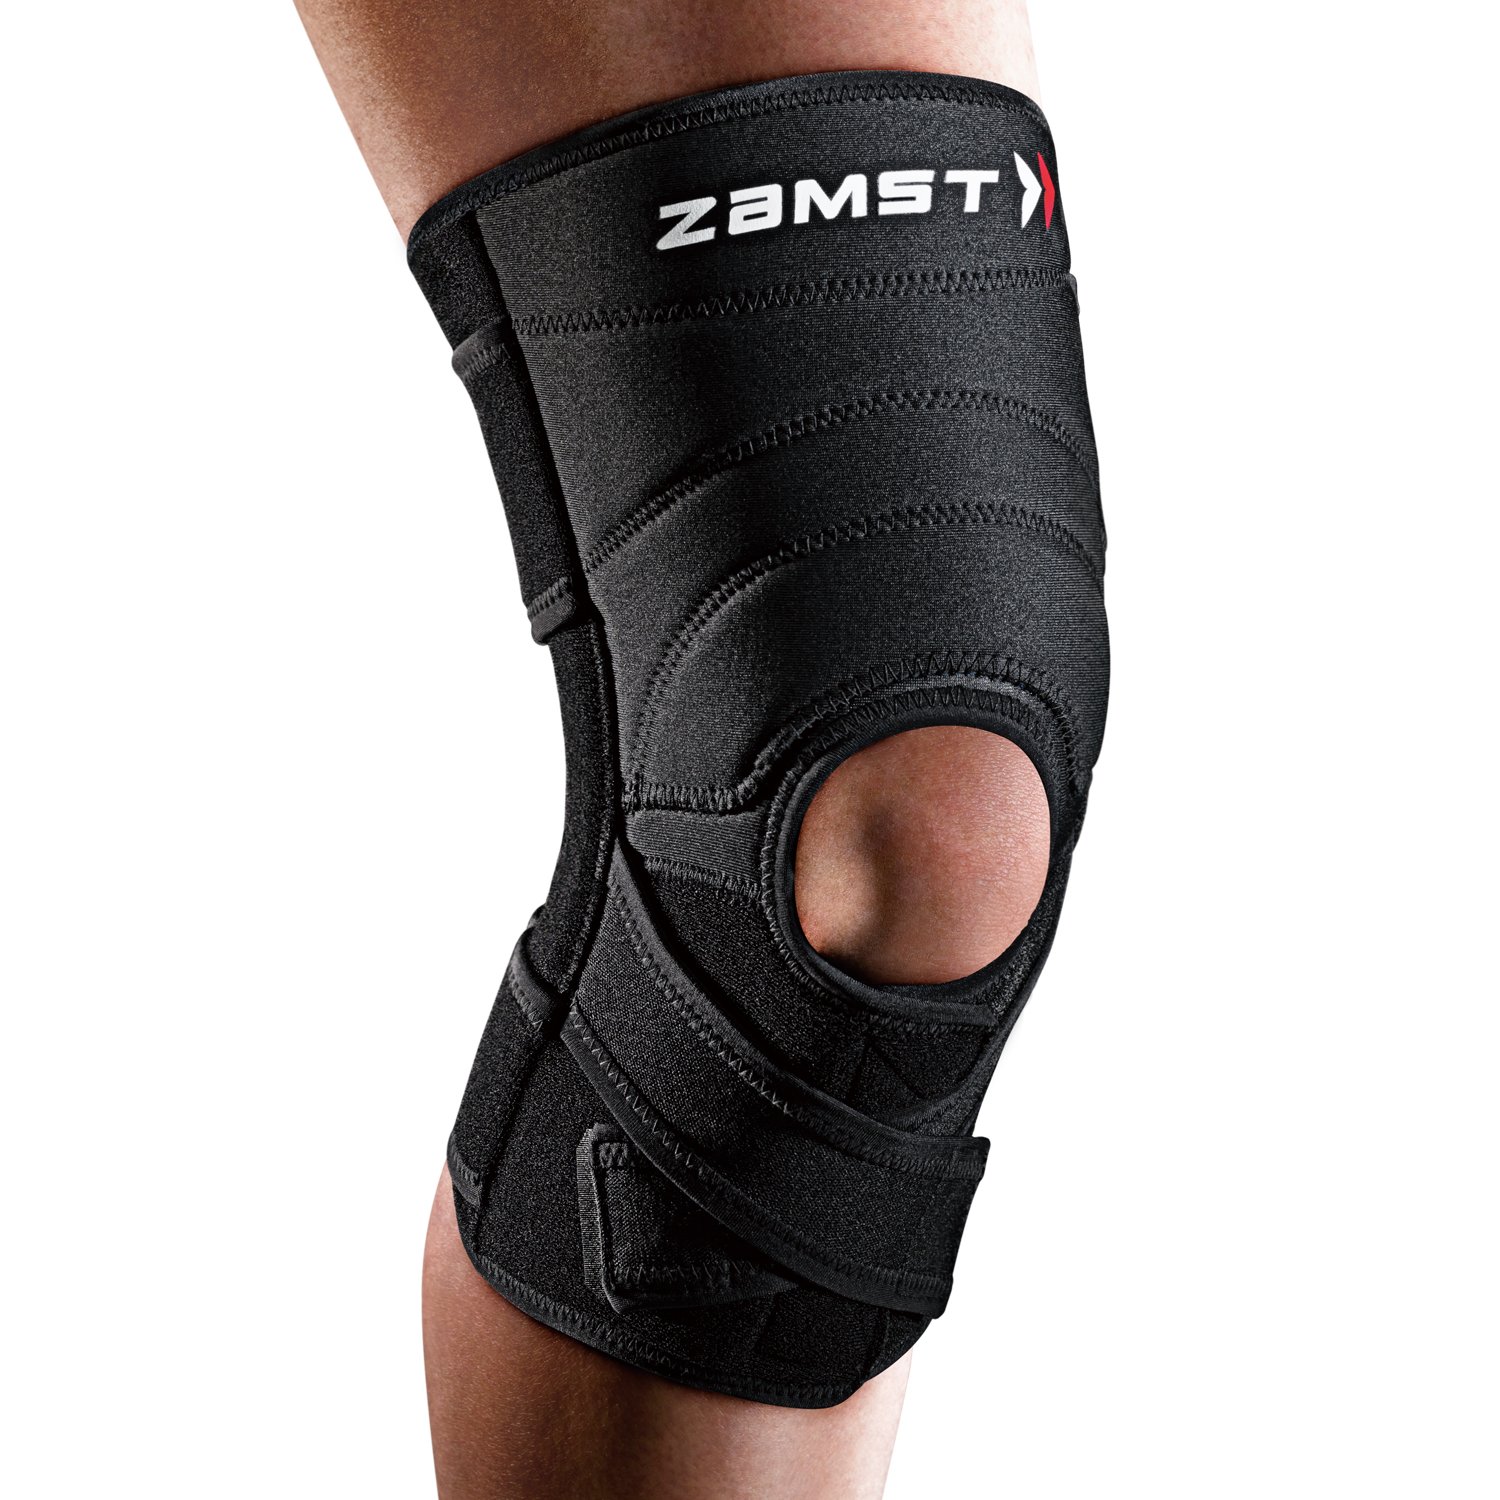 Zamst ZK-7 Sports Knee Brace For Moderate Sprains Of the ACL MCL LCL - X-Large